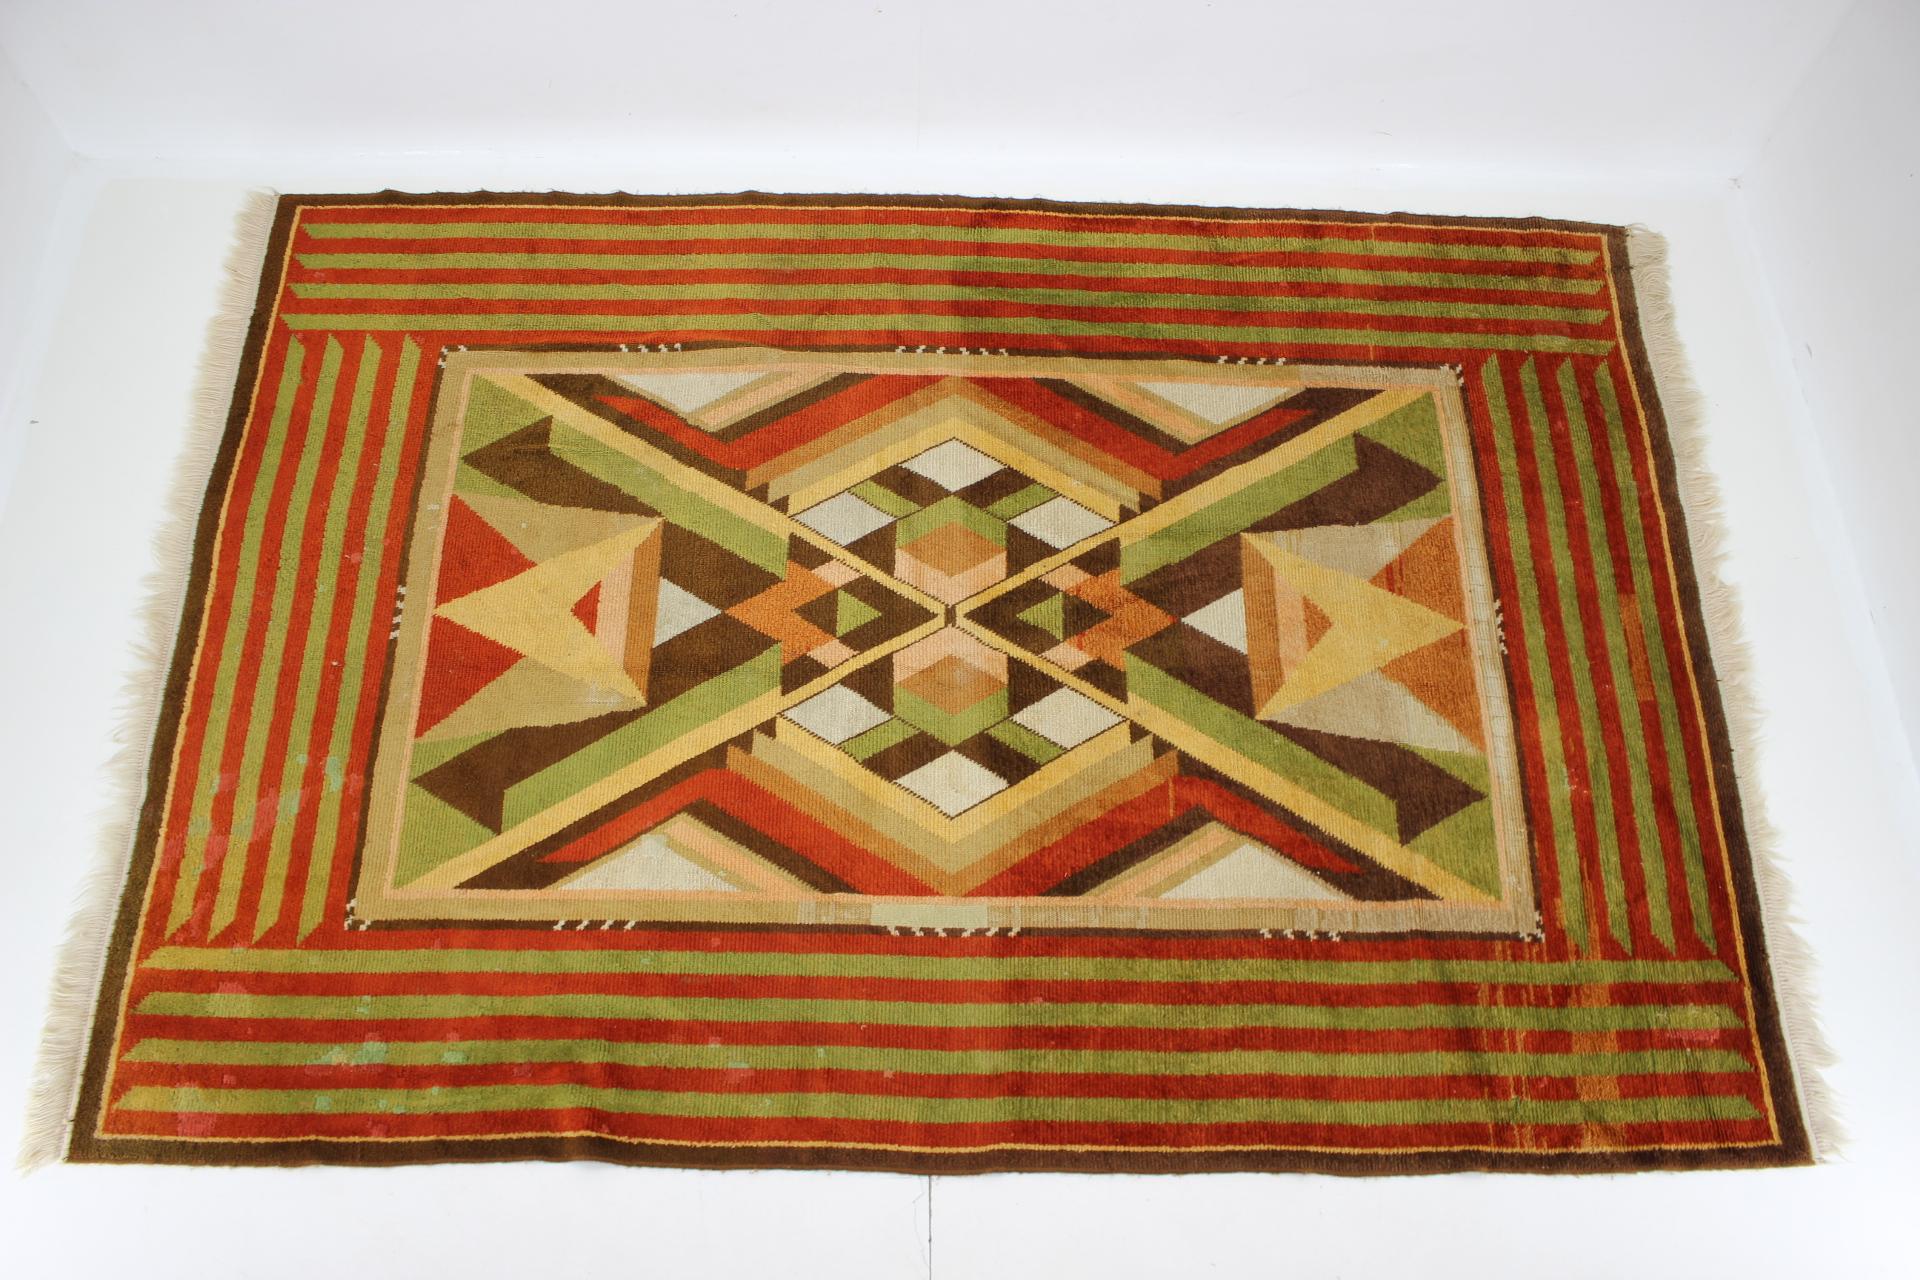 - good original condition with some signs of use
- It's visible that it has been made some reparations and some damaged parts has been replaced with wool with a slightly different color shades, nevertheless its an exceptional rarely seen piece
- rug